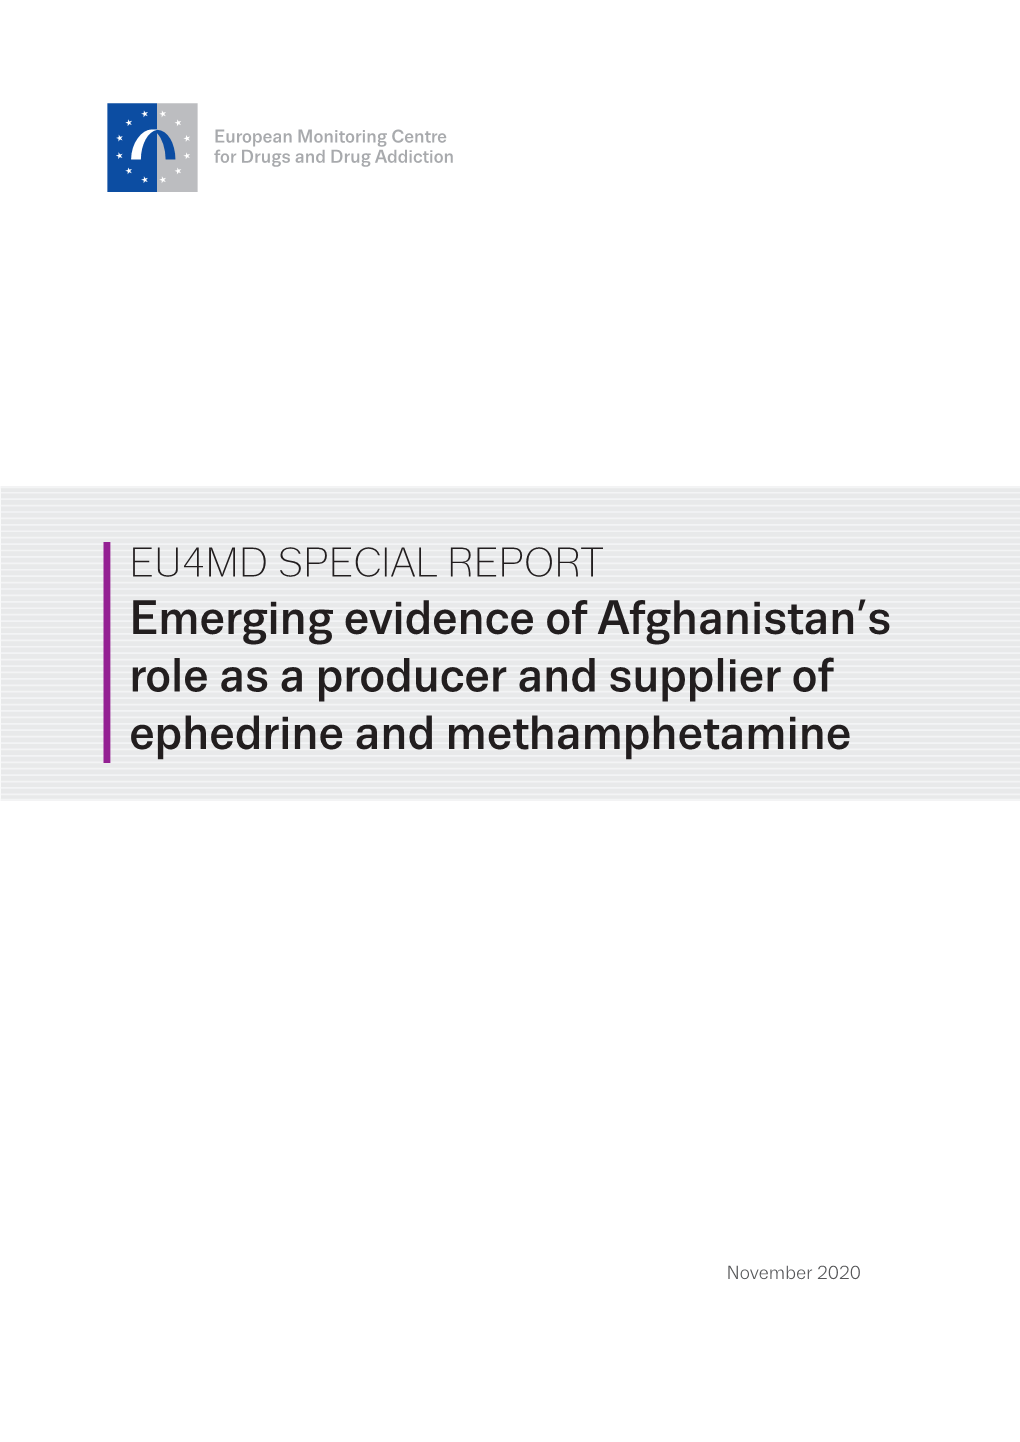 Emerging Evidence of Afghanistan's Role As a Producer and Supplier of Ephedrine and Methamphetamine